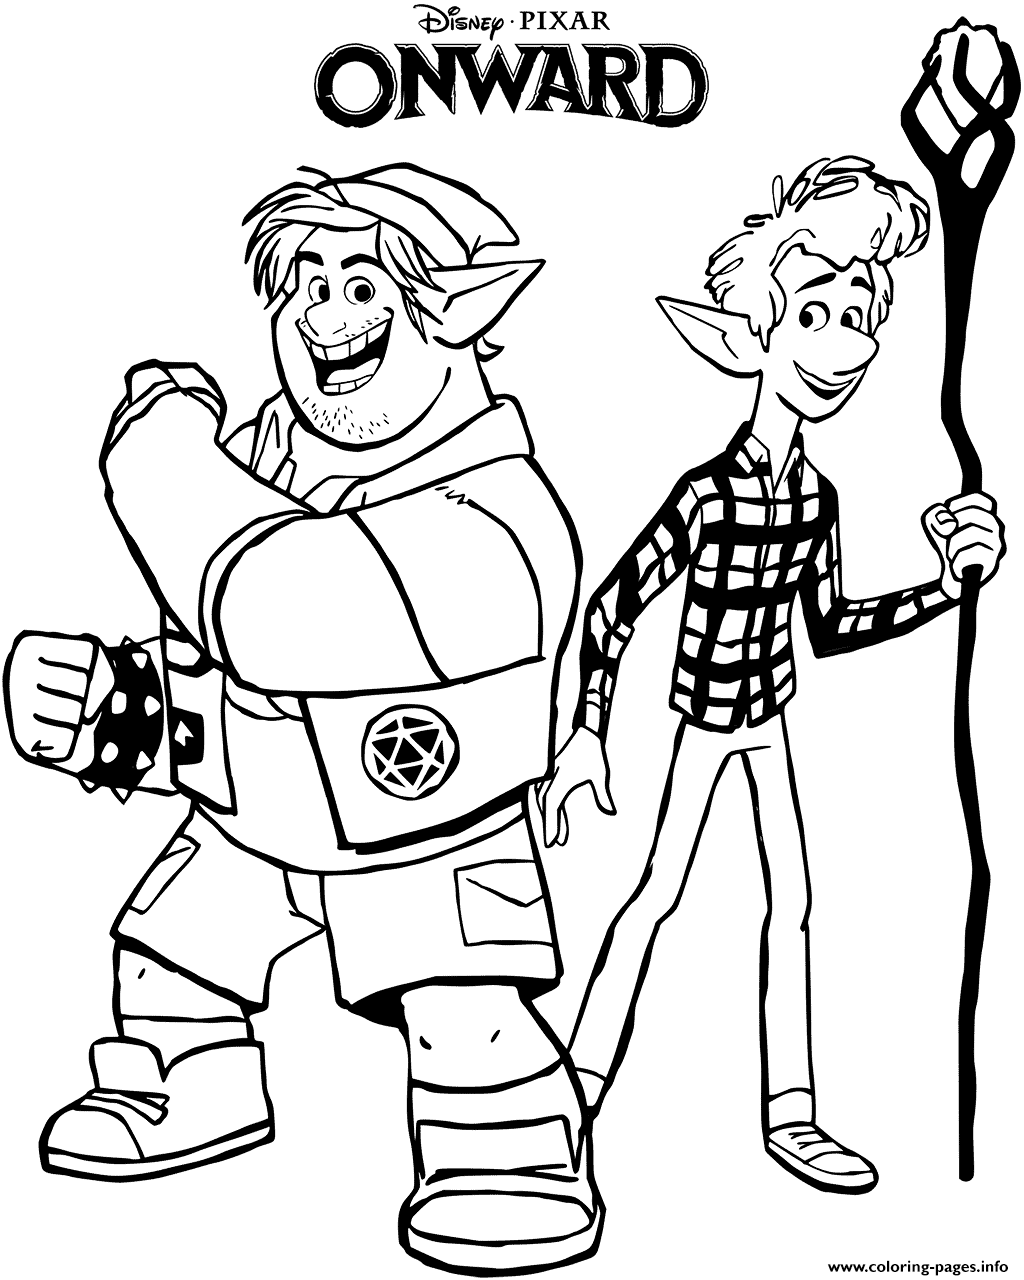 Onward Barley And Ian Ready For The Adventure coloring